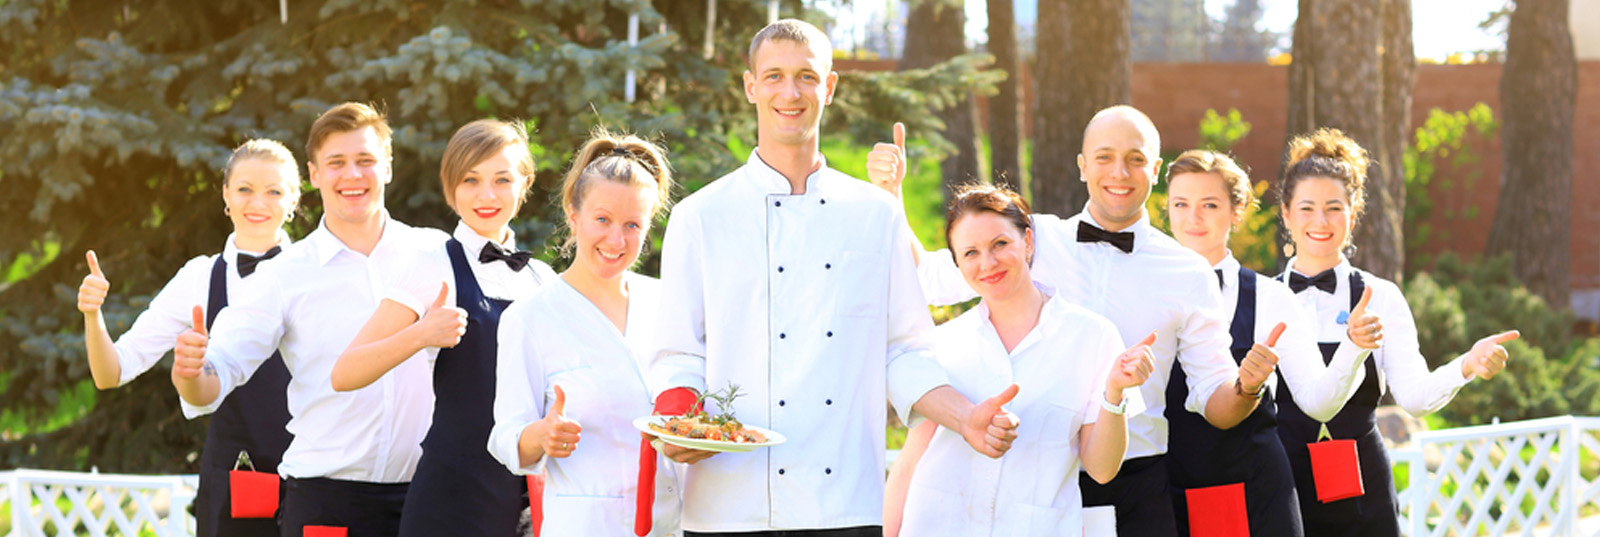 A group of event caterers posing for a picture.